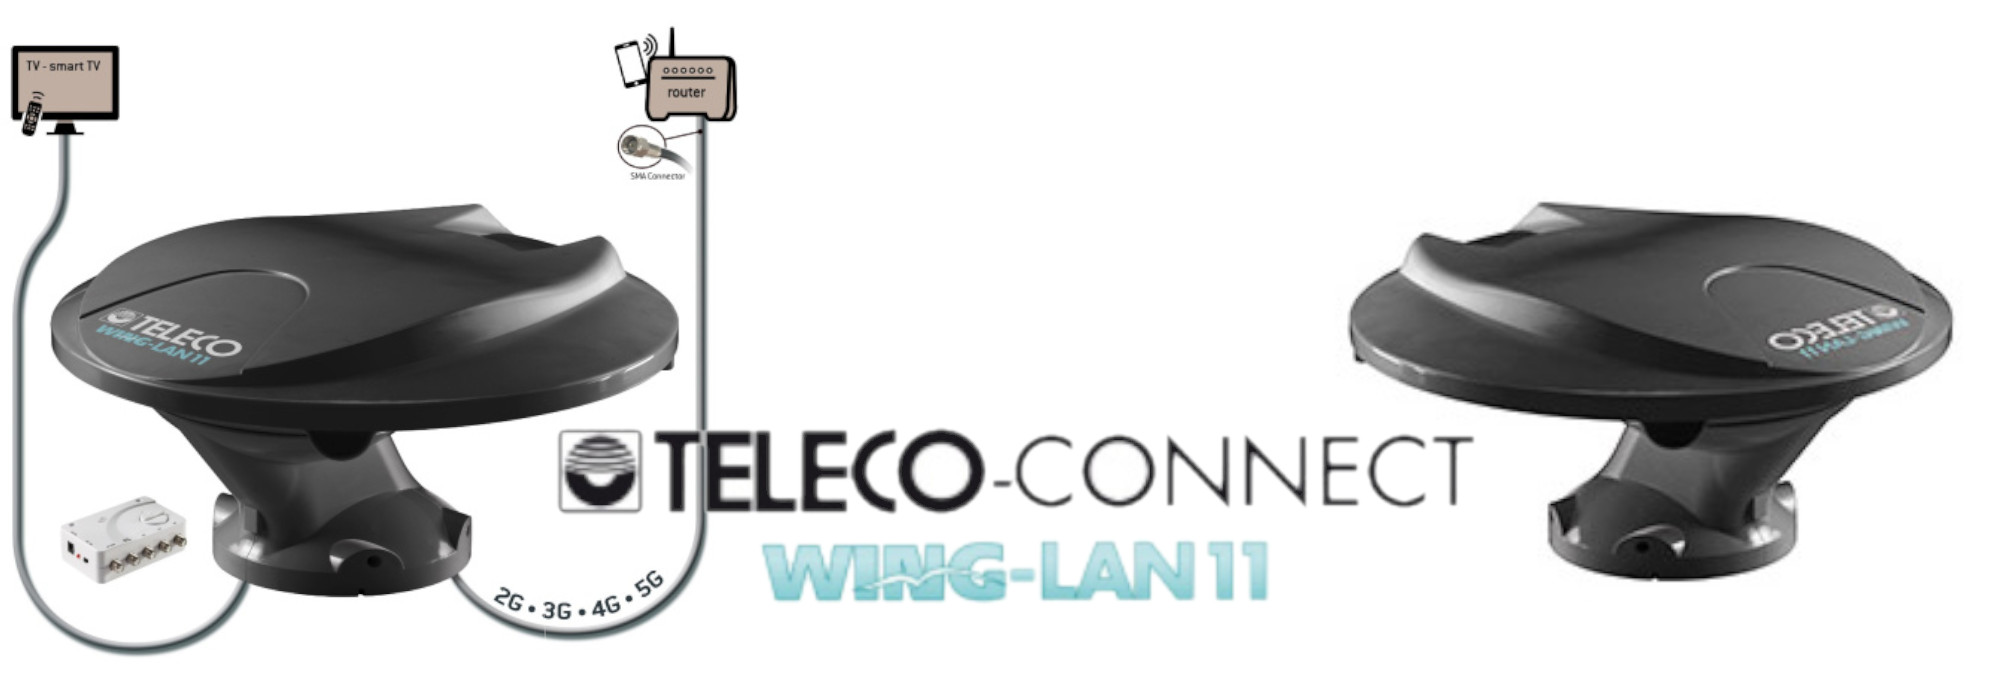 New Teleco Wing-LAN 11 omnidirectional TV antenna: compact, powerful and designed to receive even the 5G cellular signal!